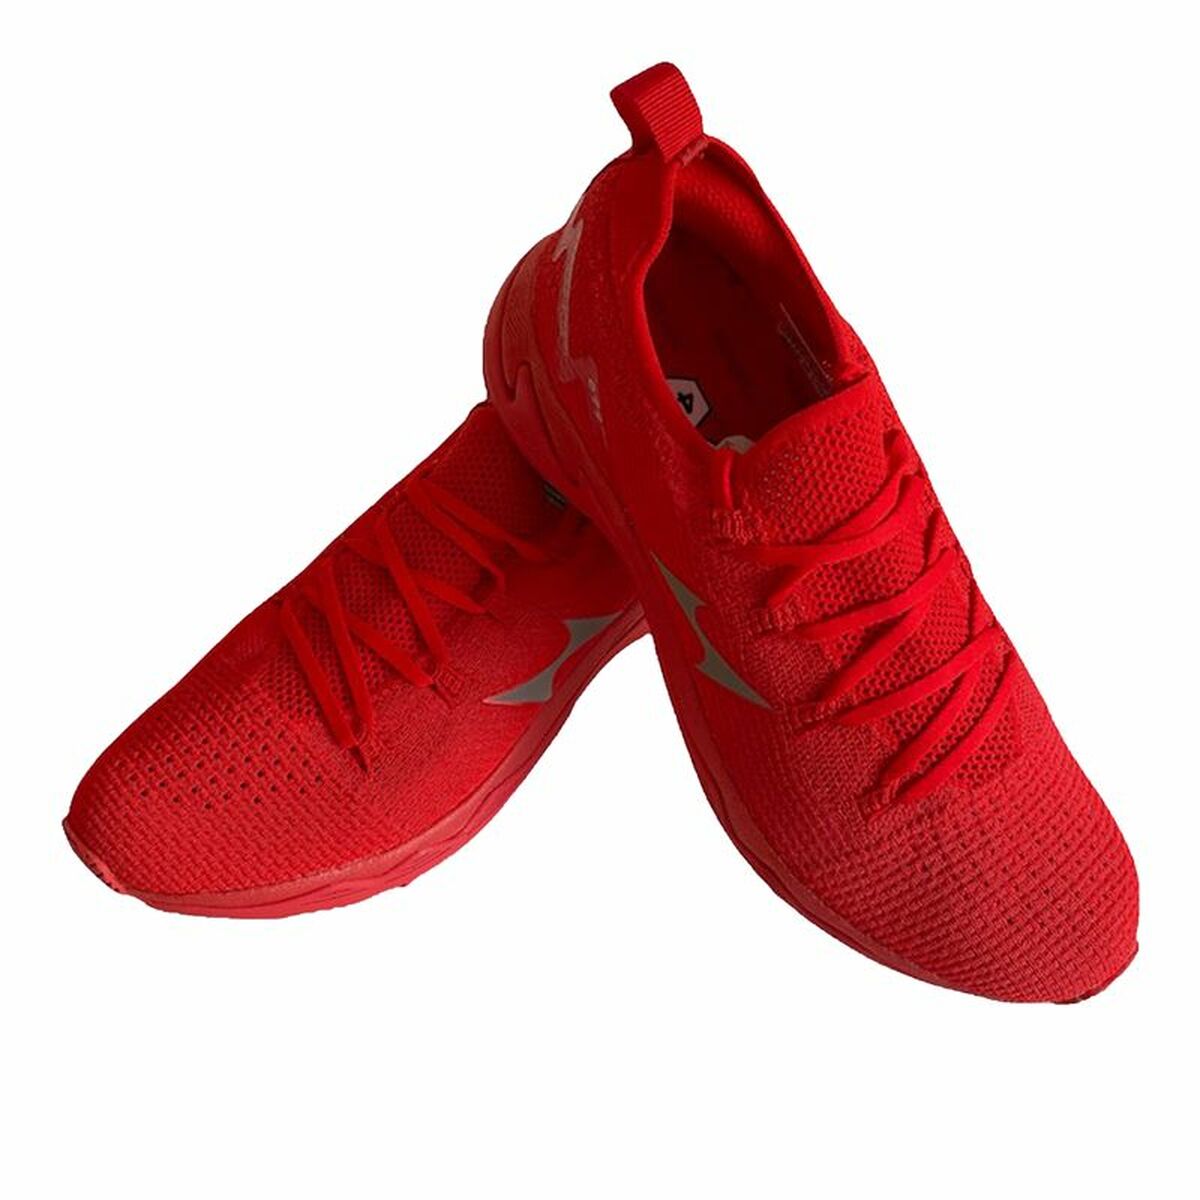 Chaussures de Running pour Adultes Health 699PRO Rouge Homme